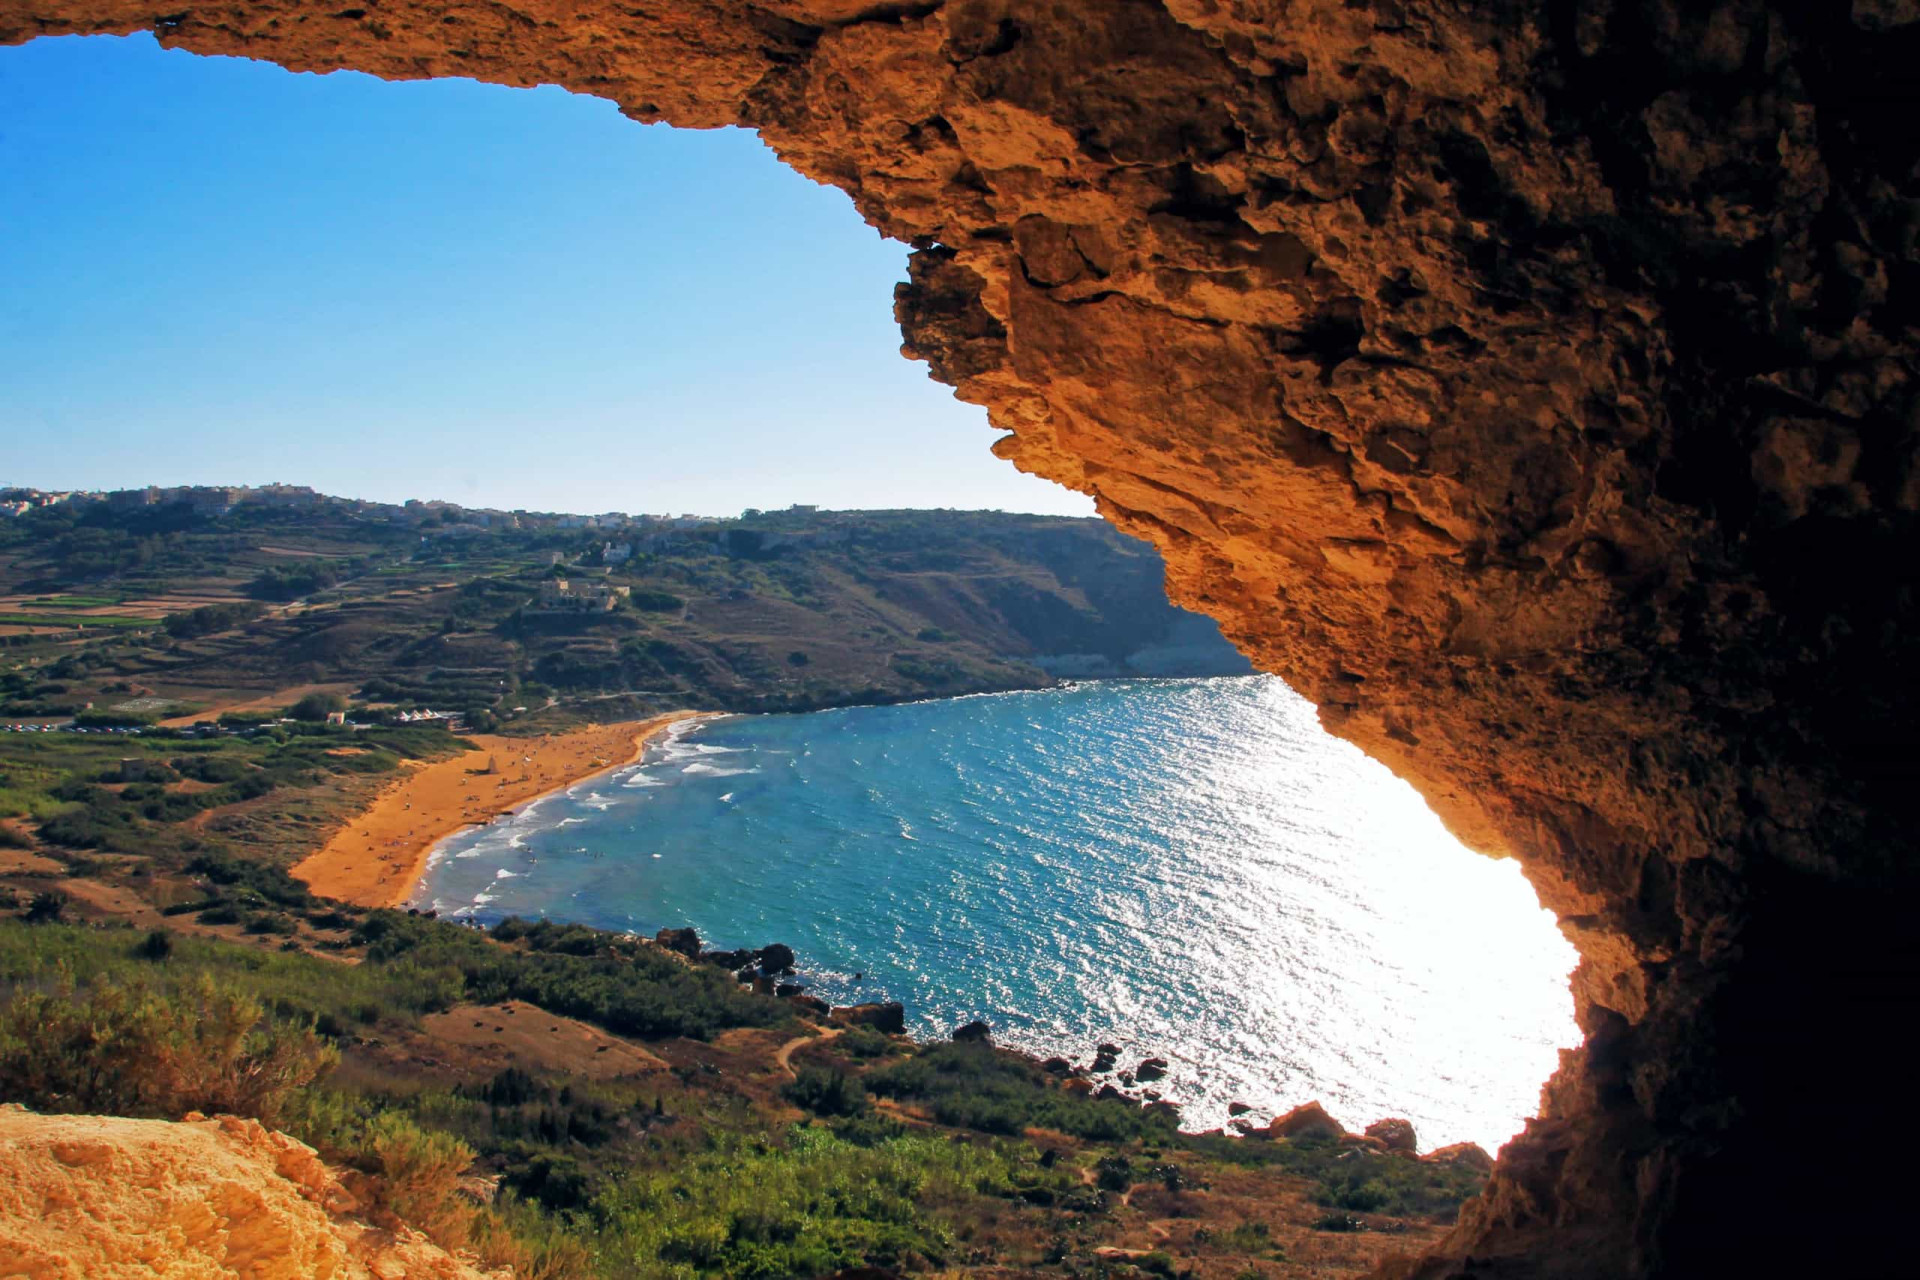 Malta's sister island Gozo is said to be what Malta used to be like: rural and peaceful. Pictured is the view from Calypso’s cave, said to be the location of part of Homer’s 'Odyssey.'<p><a href="https://www.msn.com/en-us/community/channel/vid-7xx8mnucu55yw63we9va2gwr7uihbxwc68fxqp25x6tg4ftibpra?cvid=94631541bc0f4f89bfd59158d696ad7e">Follow us and access great exclusive content every day</a></p>